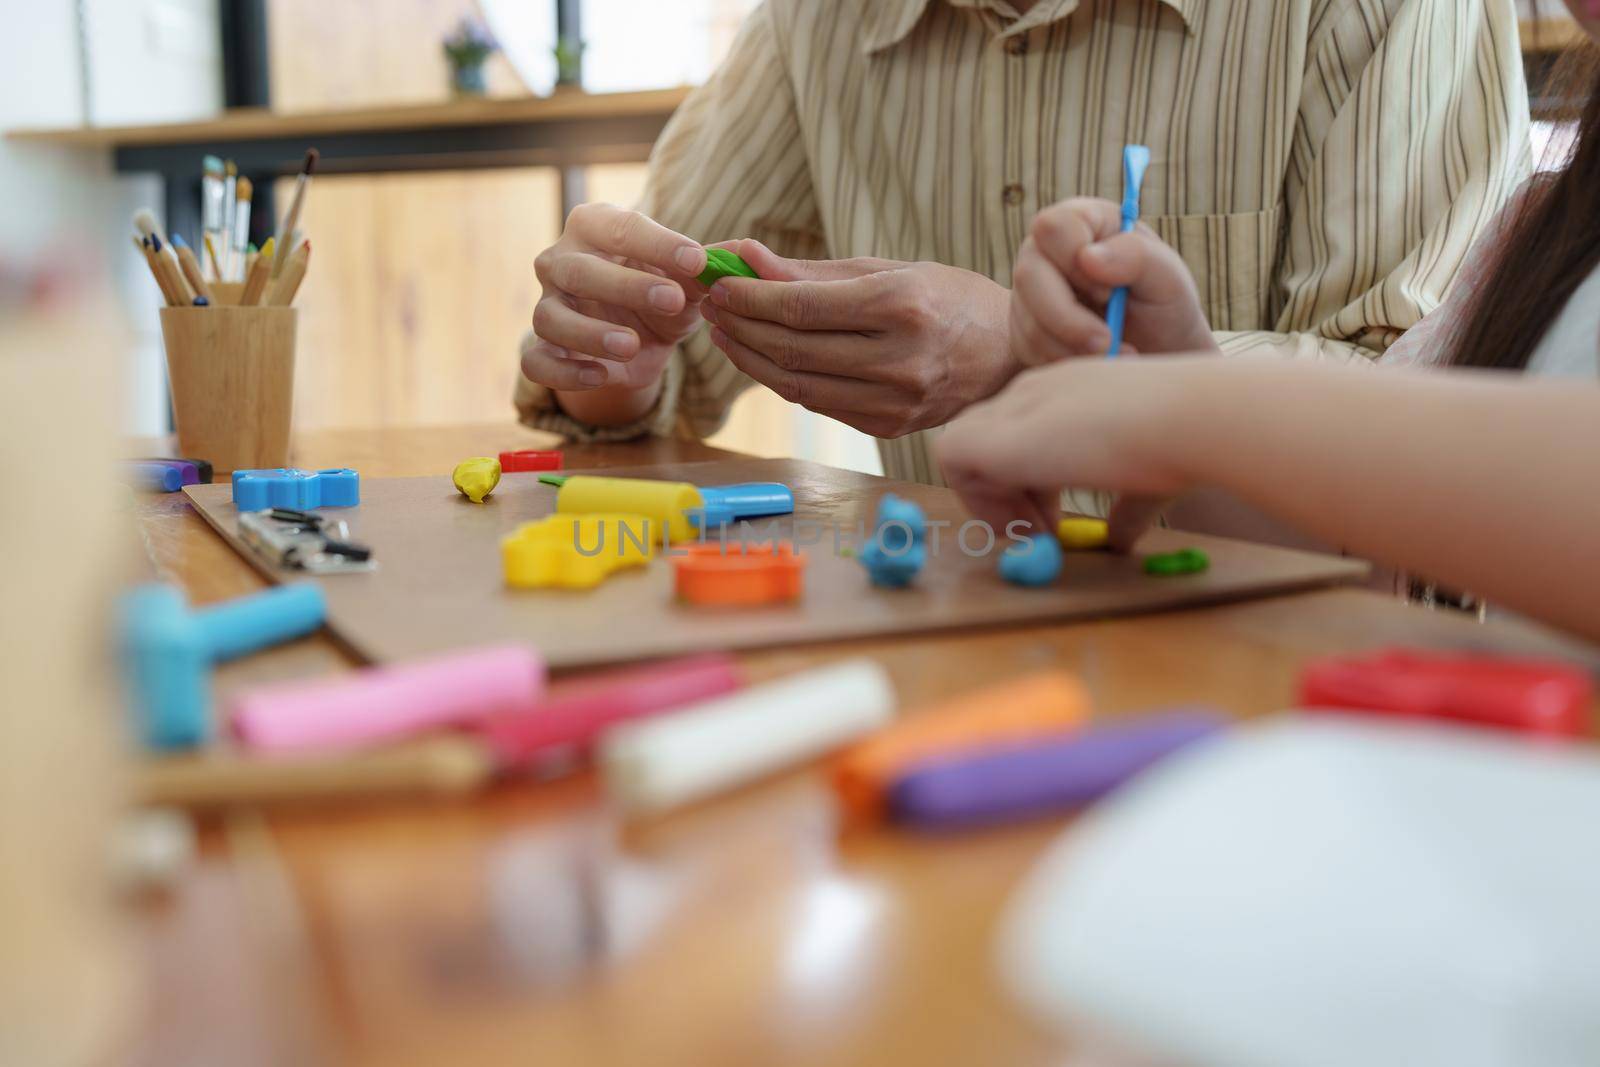 Adorable little girl and father playing with colorful plasticine. Handmade skills training.